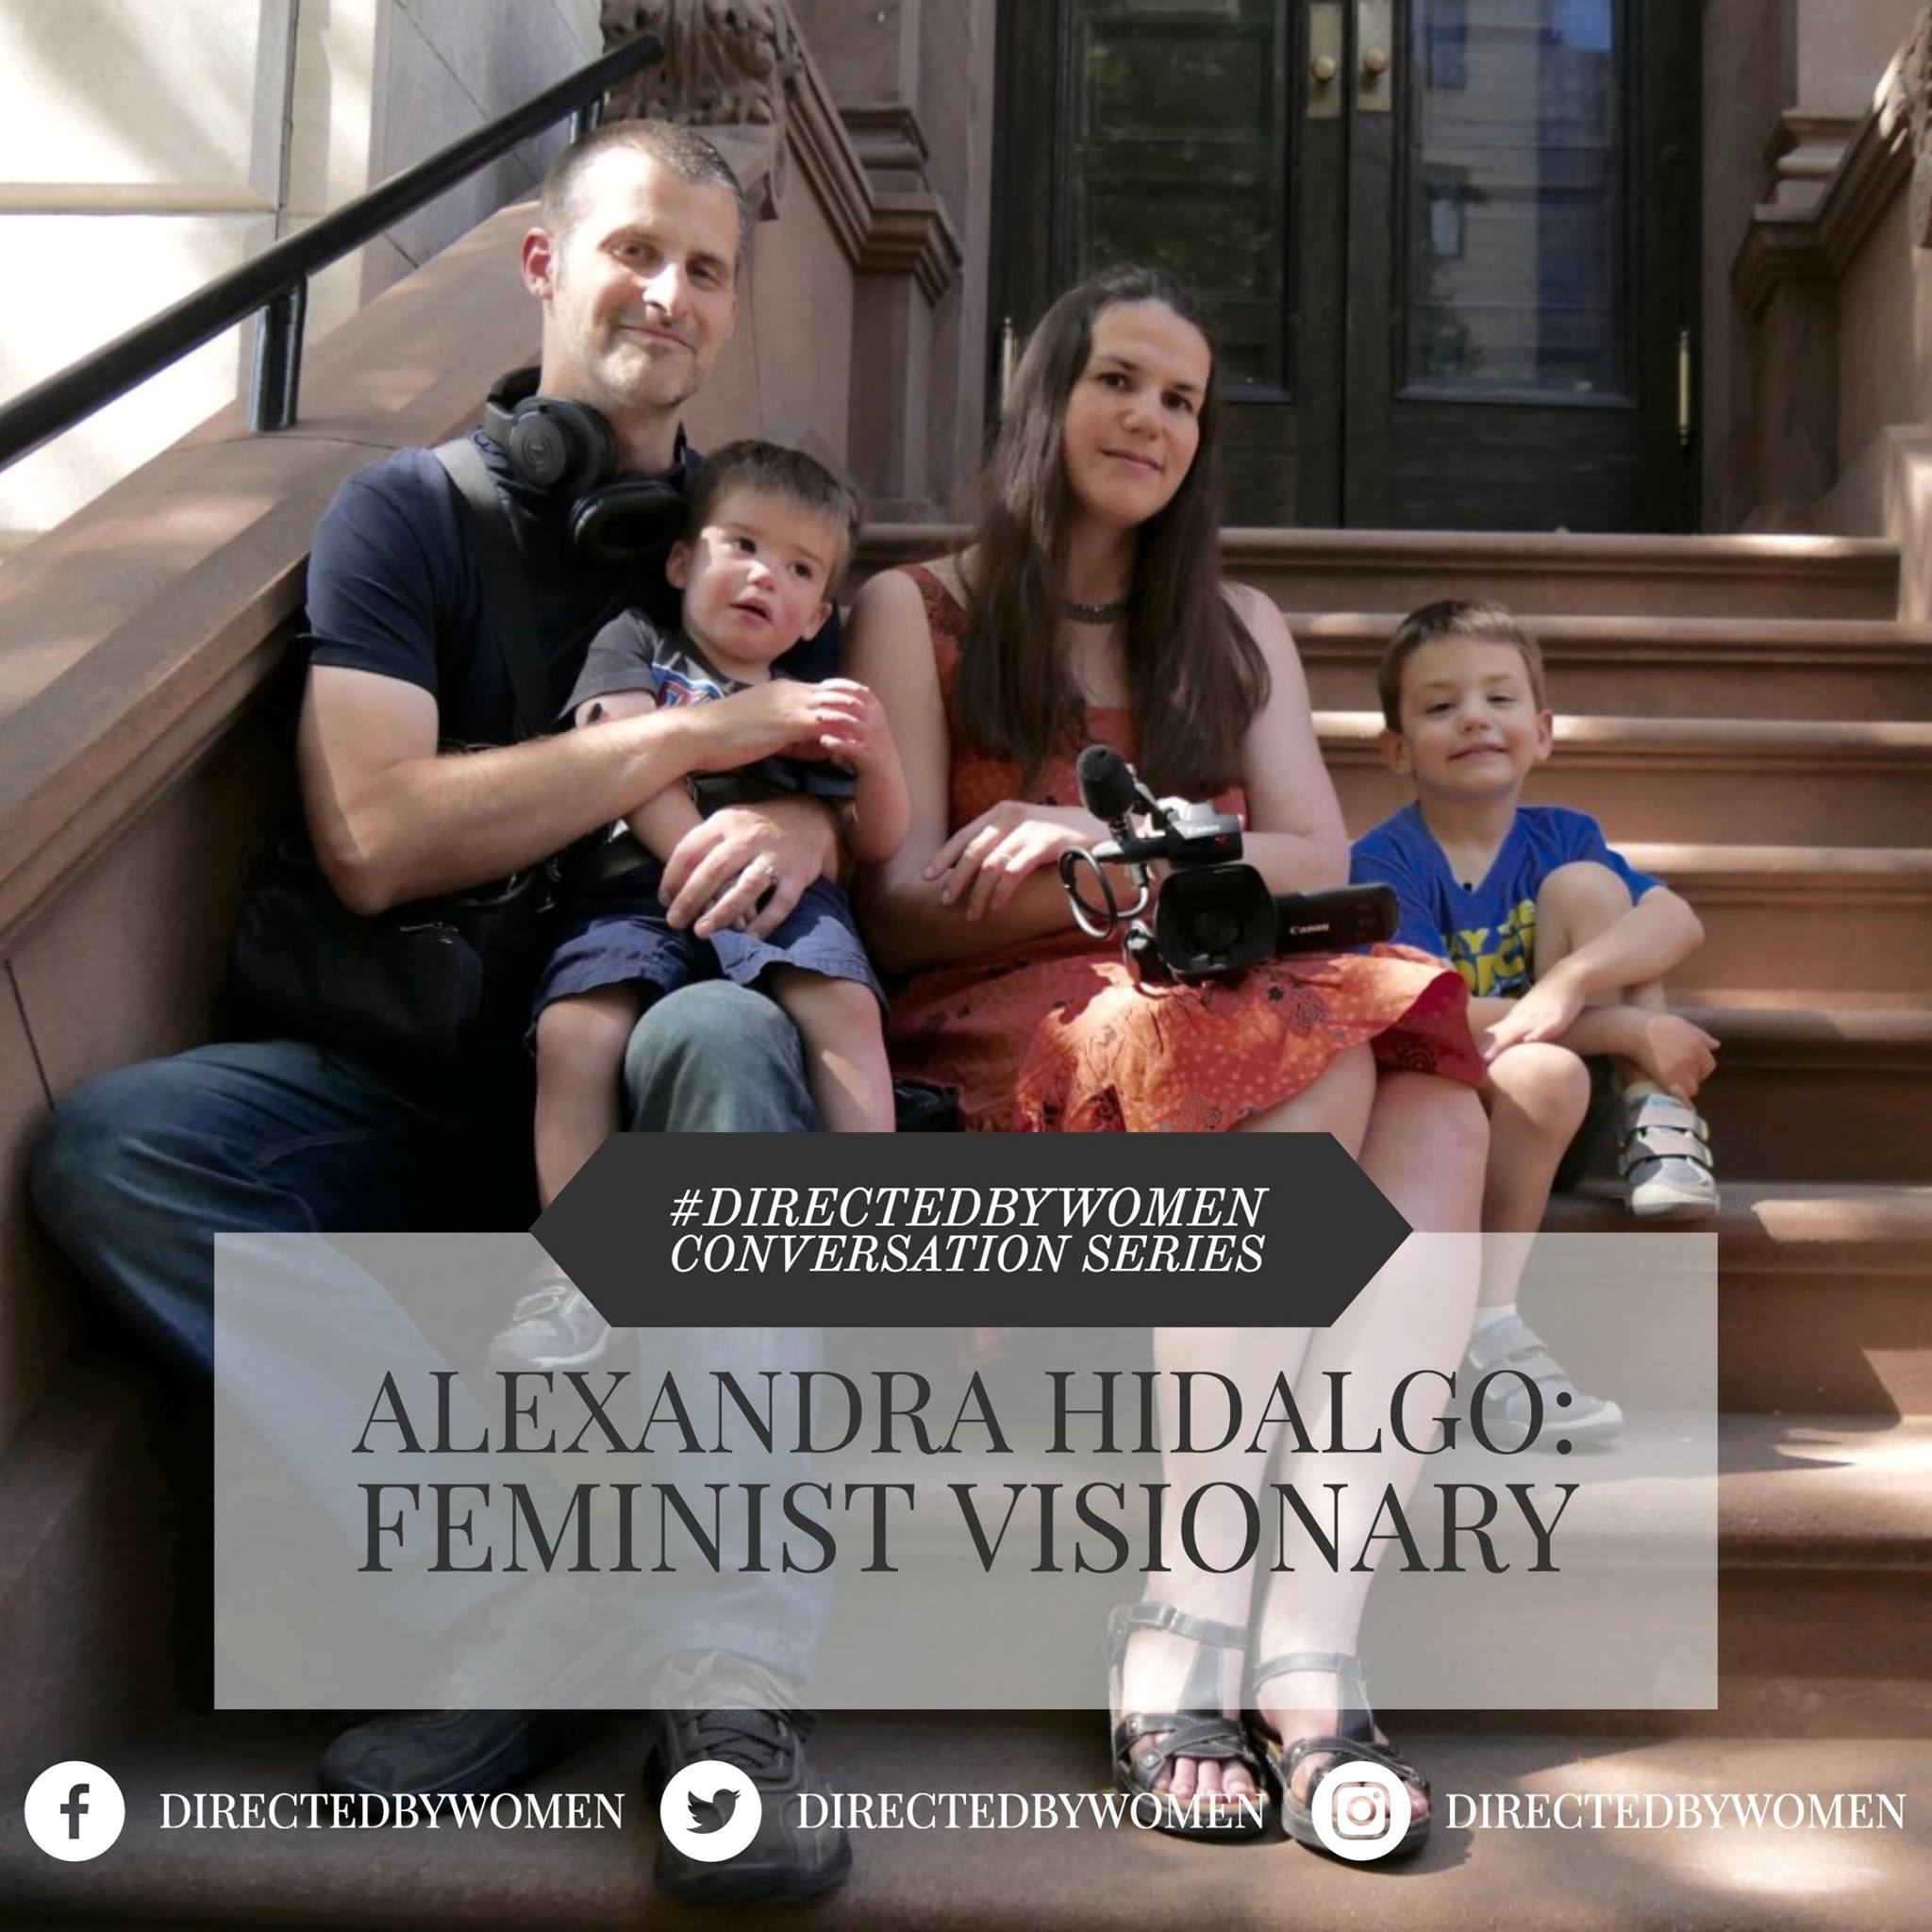 Alexandra Hidalgo: Feminist Visionary from the Directed by Women website.)